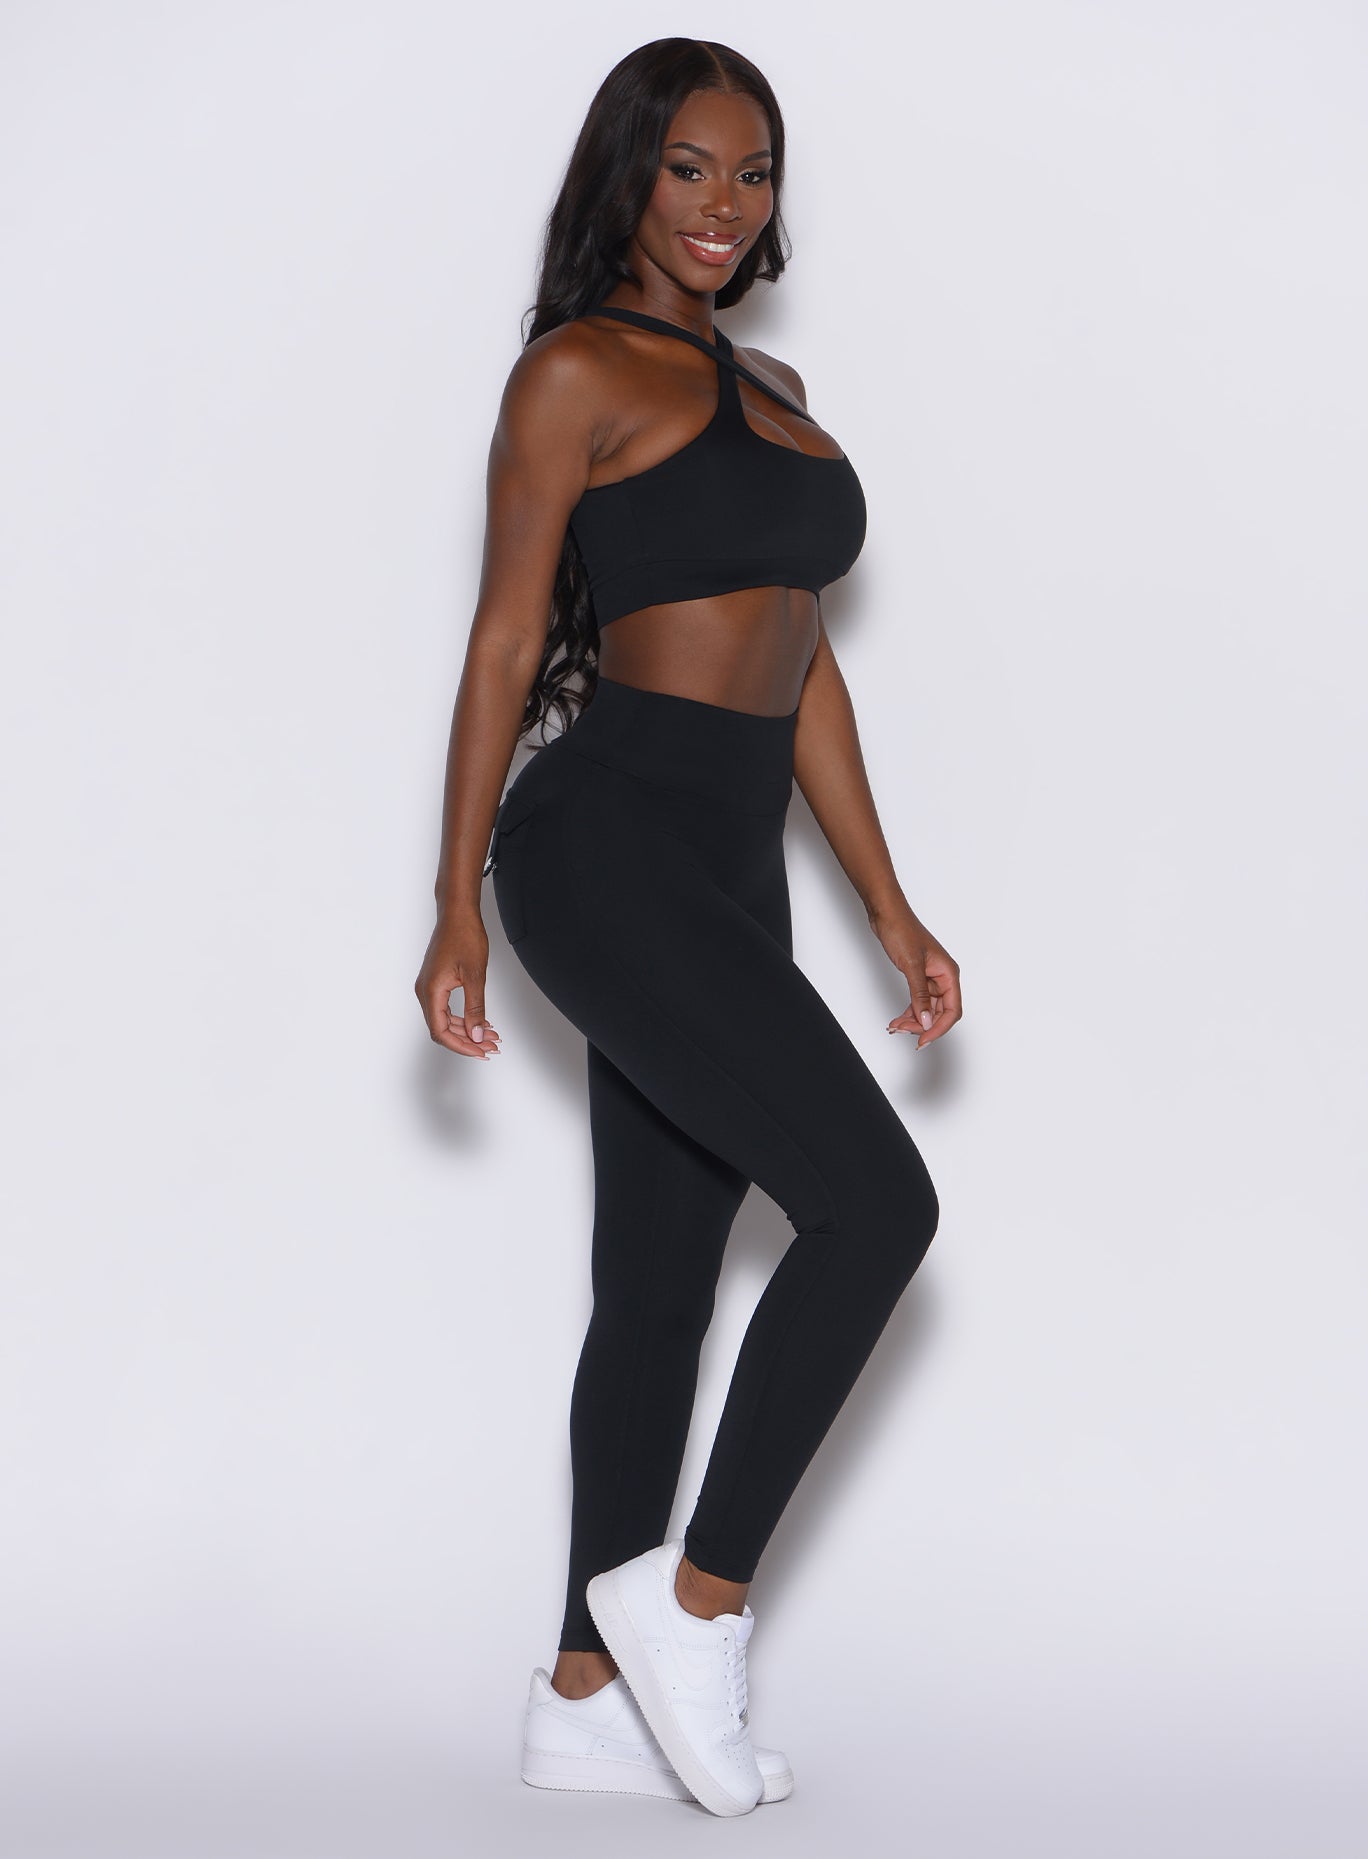 right side profile view of a model wearing our black pocket pop leggings along with the matching bombshell sports bra